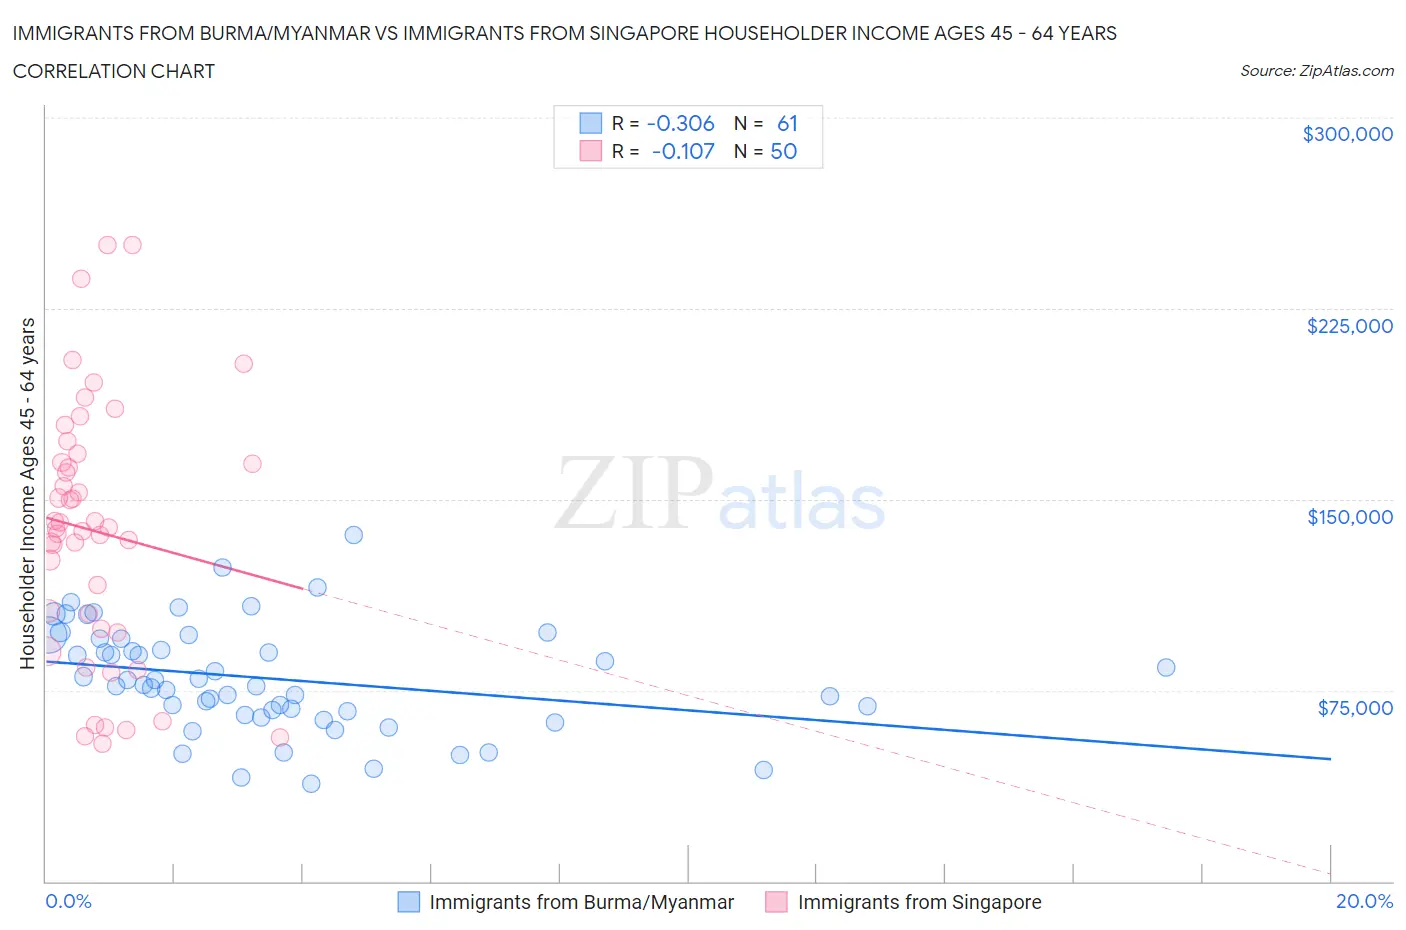 Immigrants from Burma/Myanmar vs Immigrants from Singapore Householder Income Ages 45 - 64 years